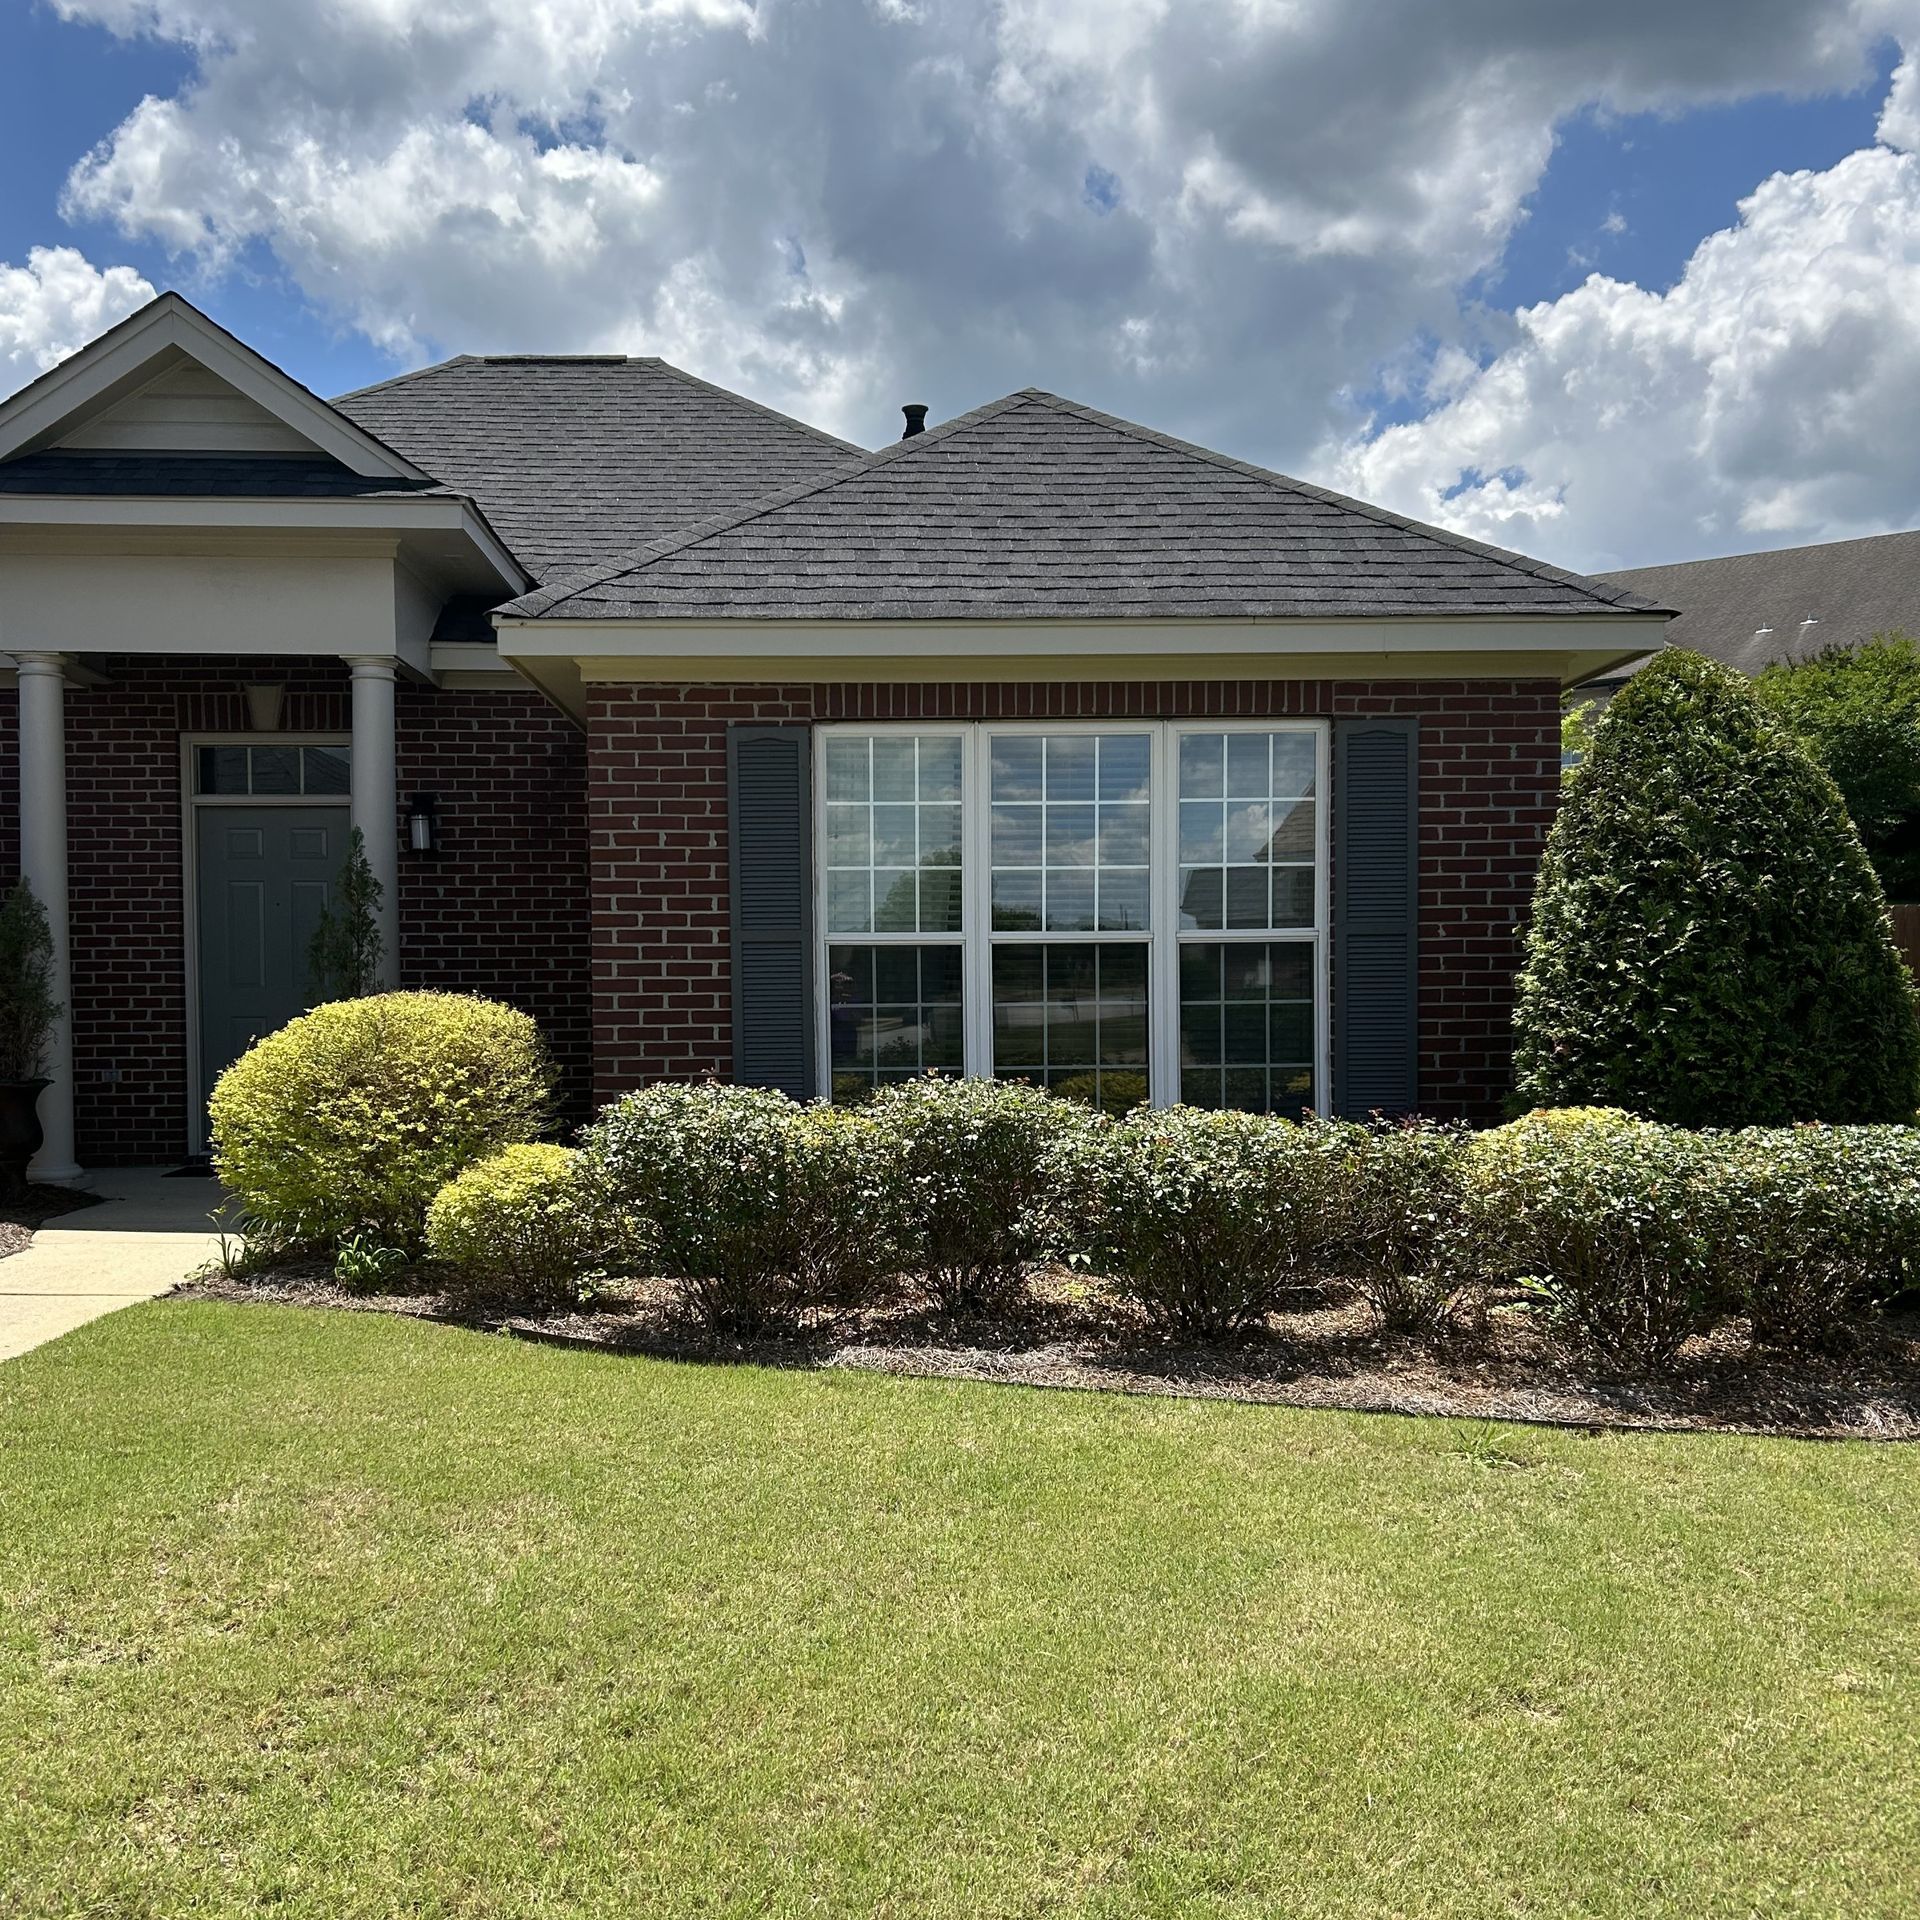 window tinting - With double the heat rejection & glare reduction, SPF Precision Crystal Clear Tint adds top efficiency with home comfort inside residential windows. Montgomery AL